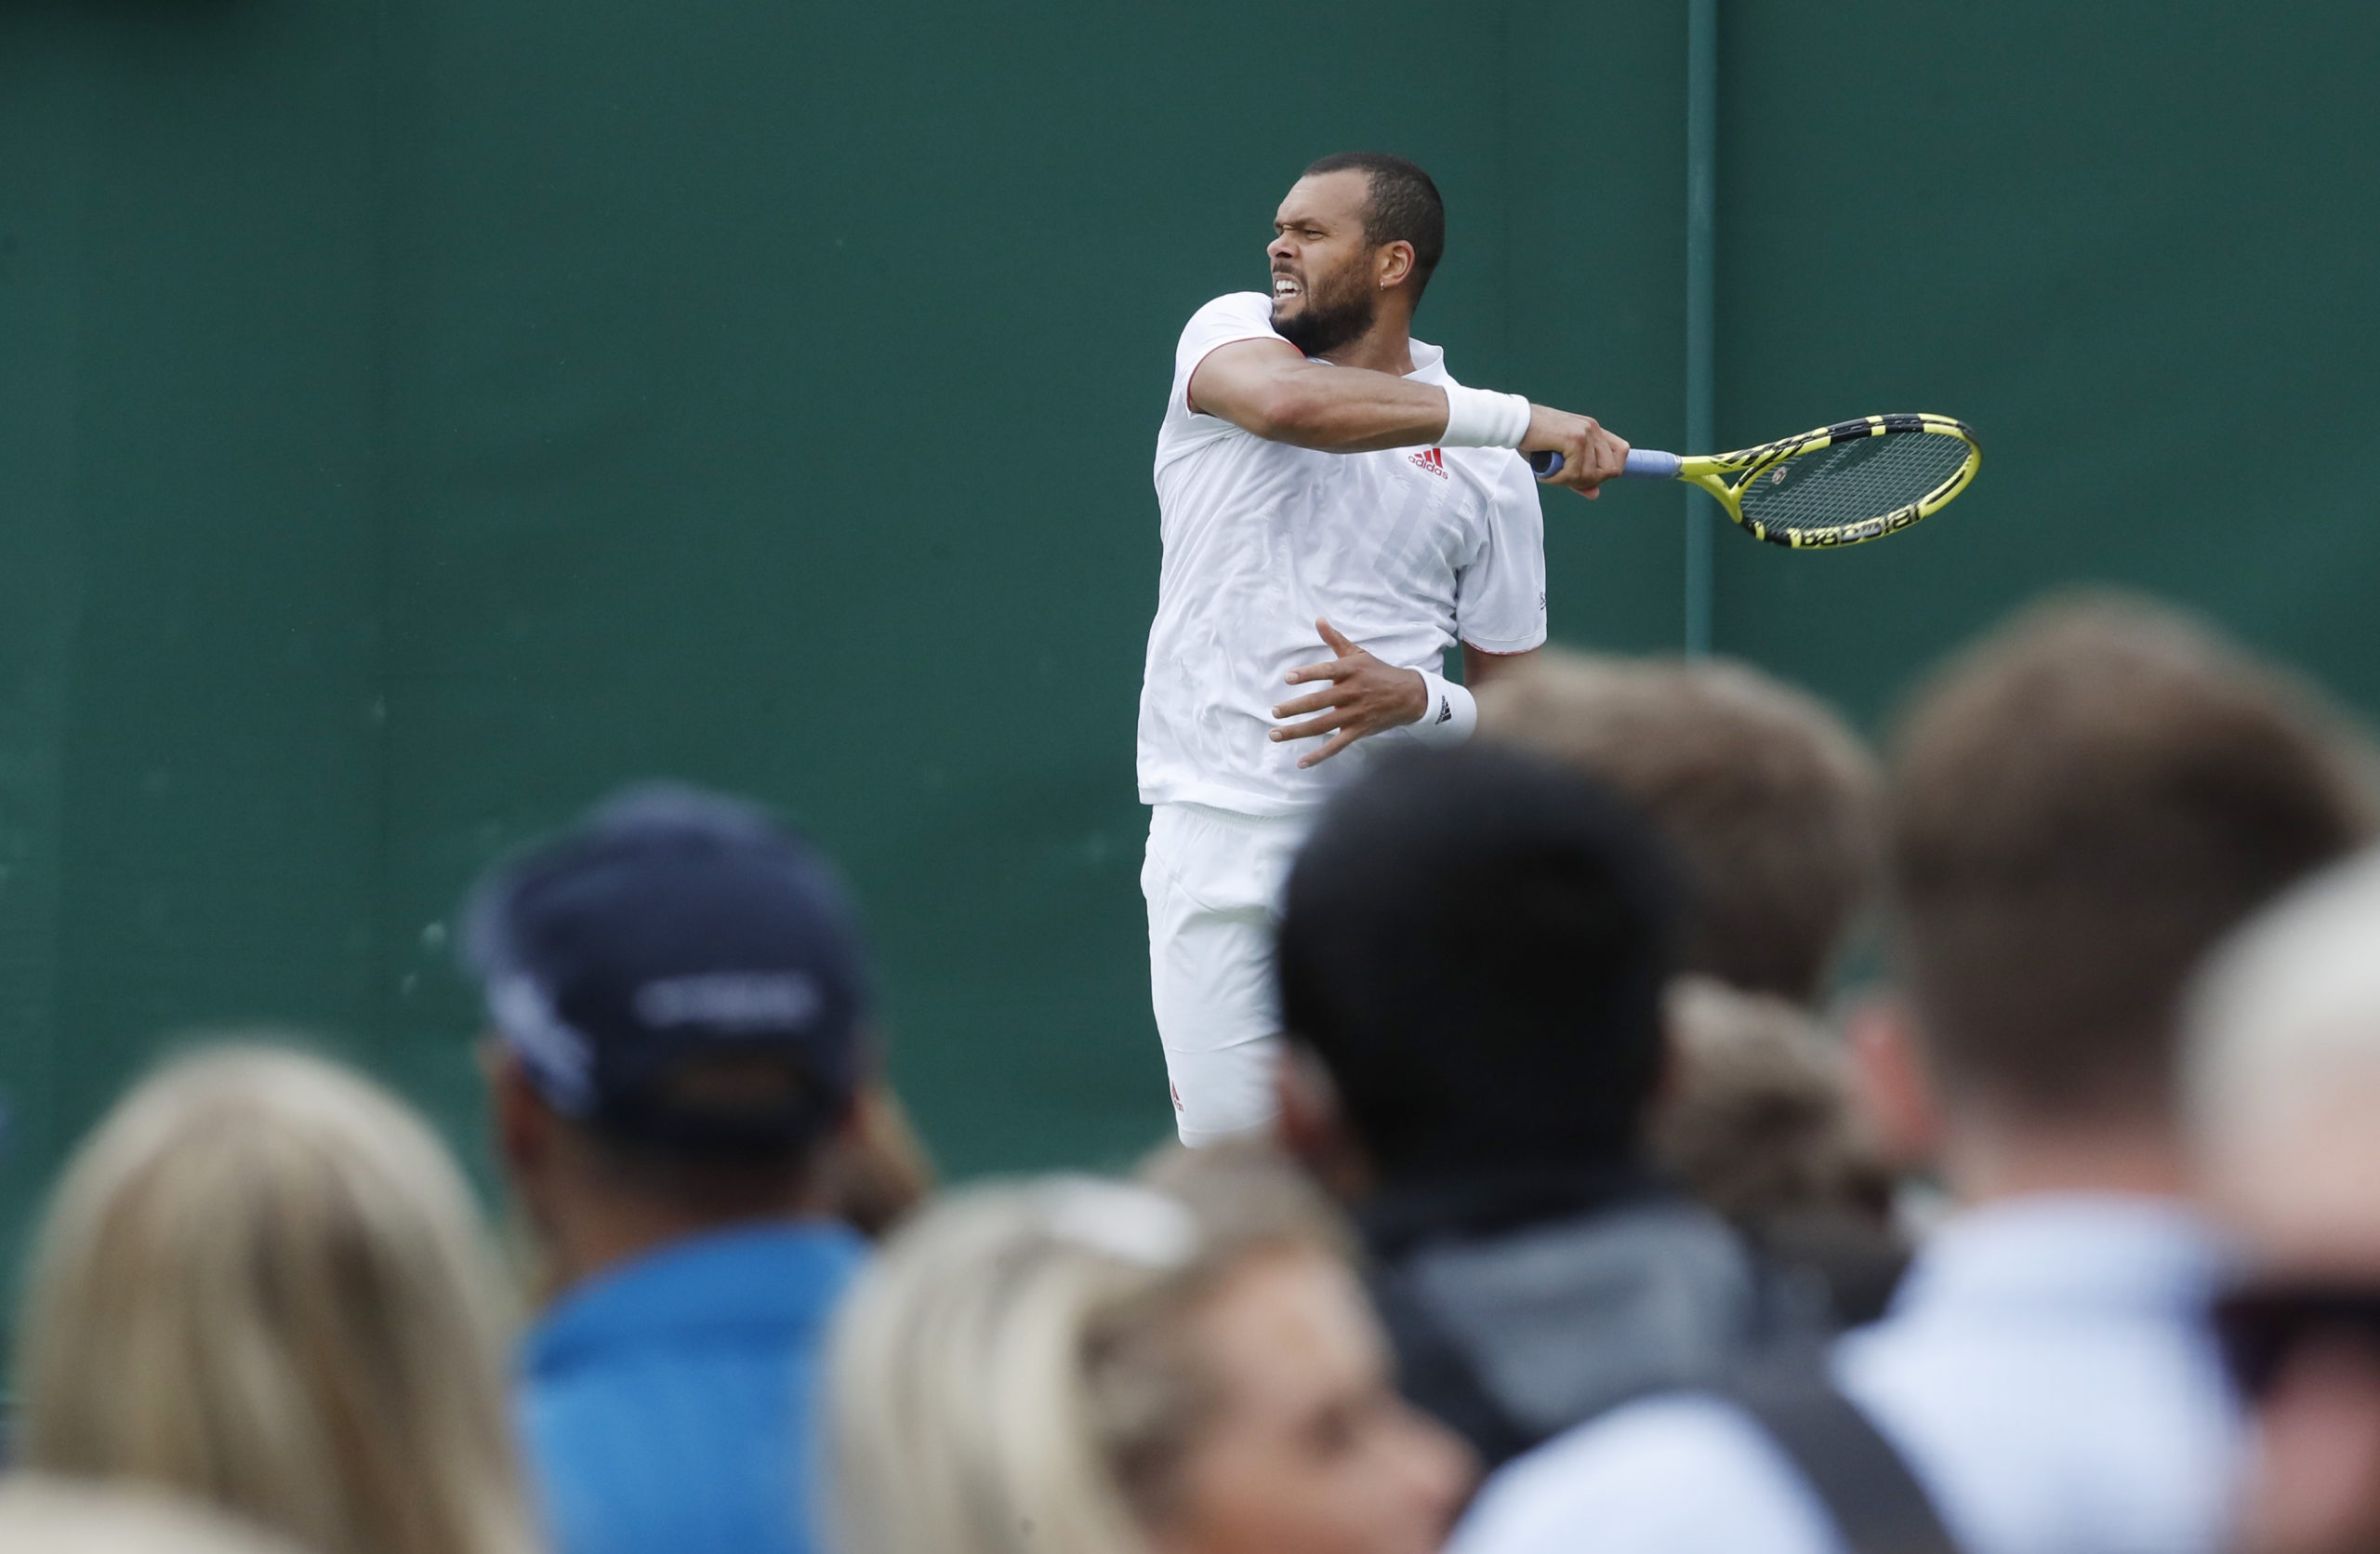 Tennis - Wimbledon - All England Lawn Tennis and Croquet Club, London, Britain - June 30, 2021 France's Jo-Wilfried Tsonga in action during his first round match against Sweden's Mikael Ymer 